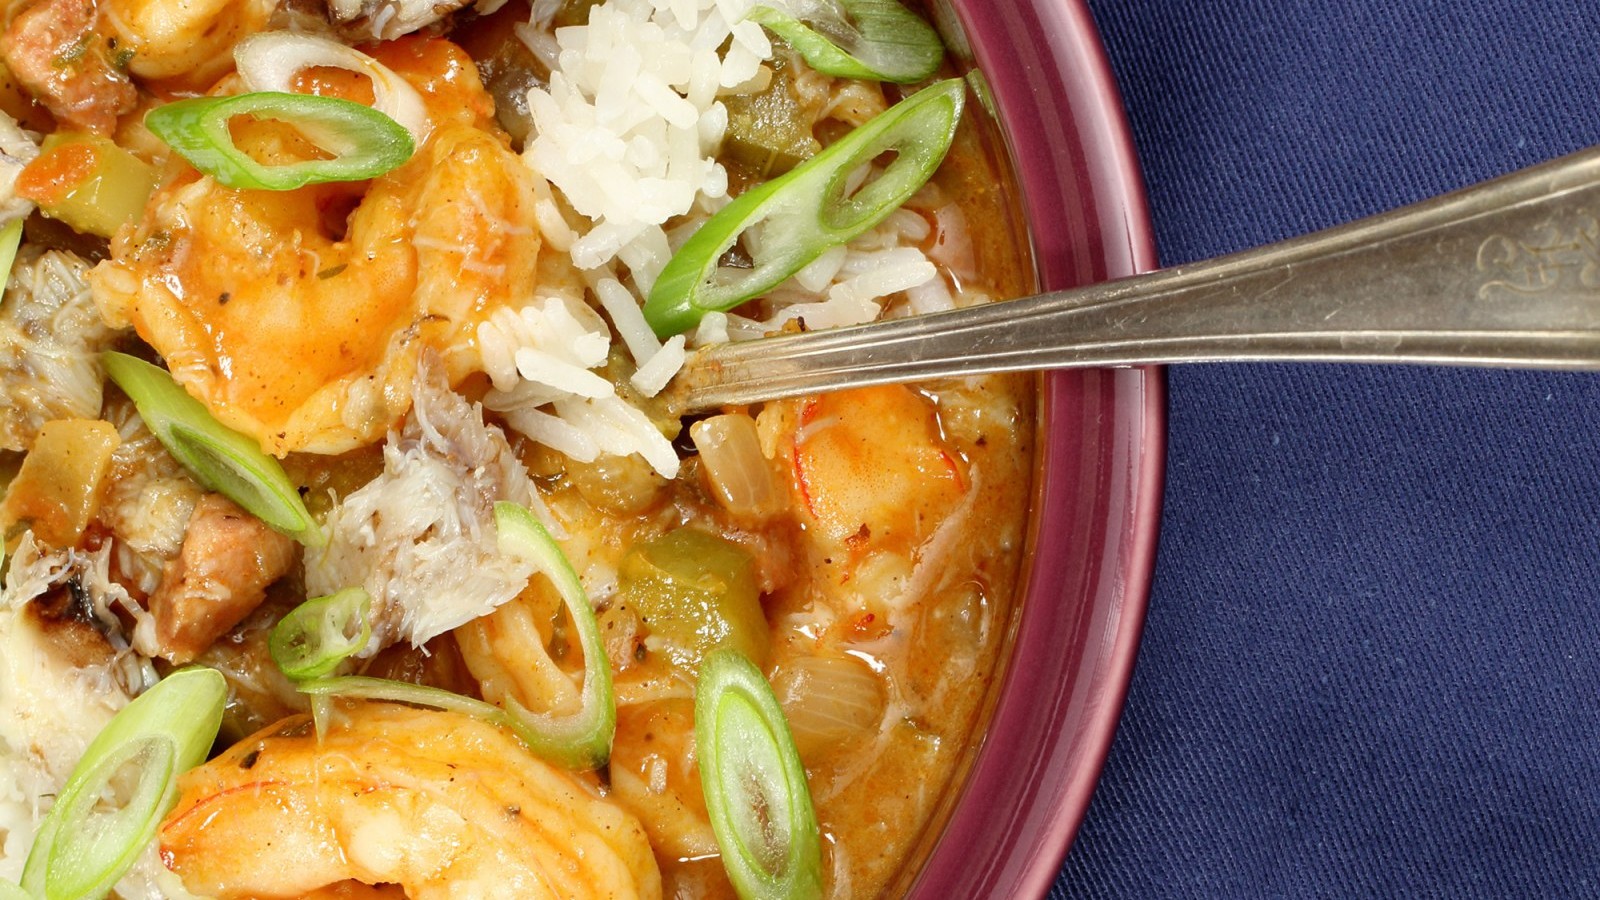 Image of Spicy Seafood Gumbo